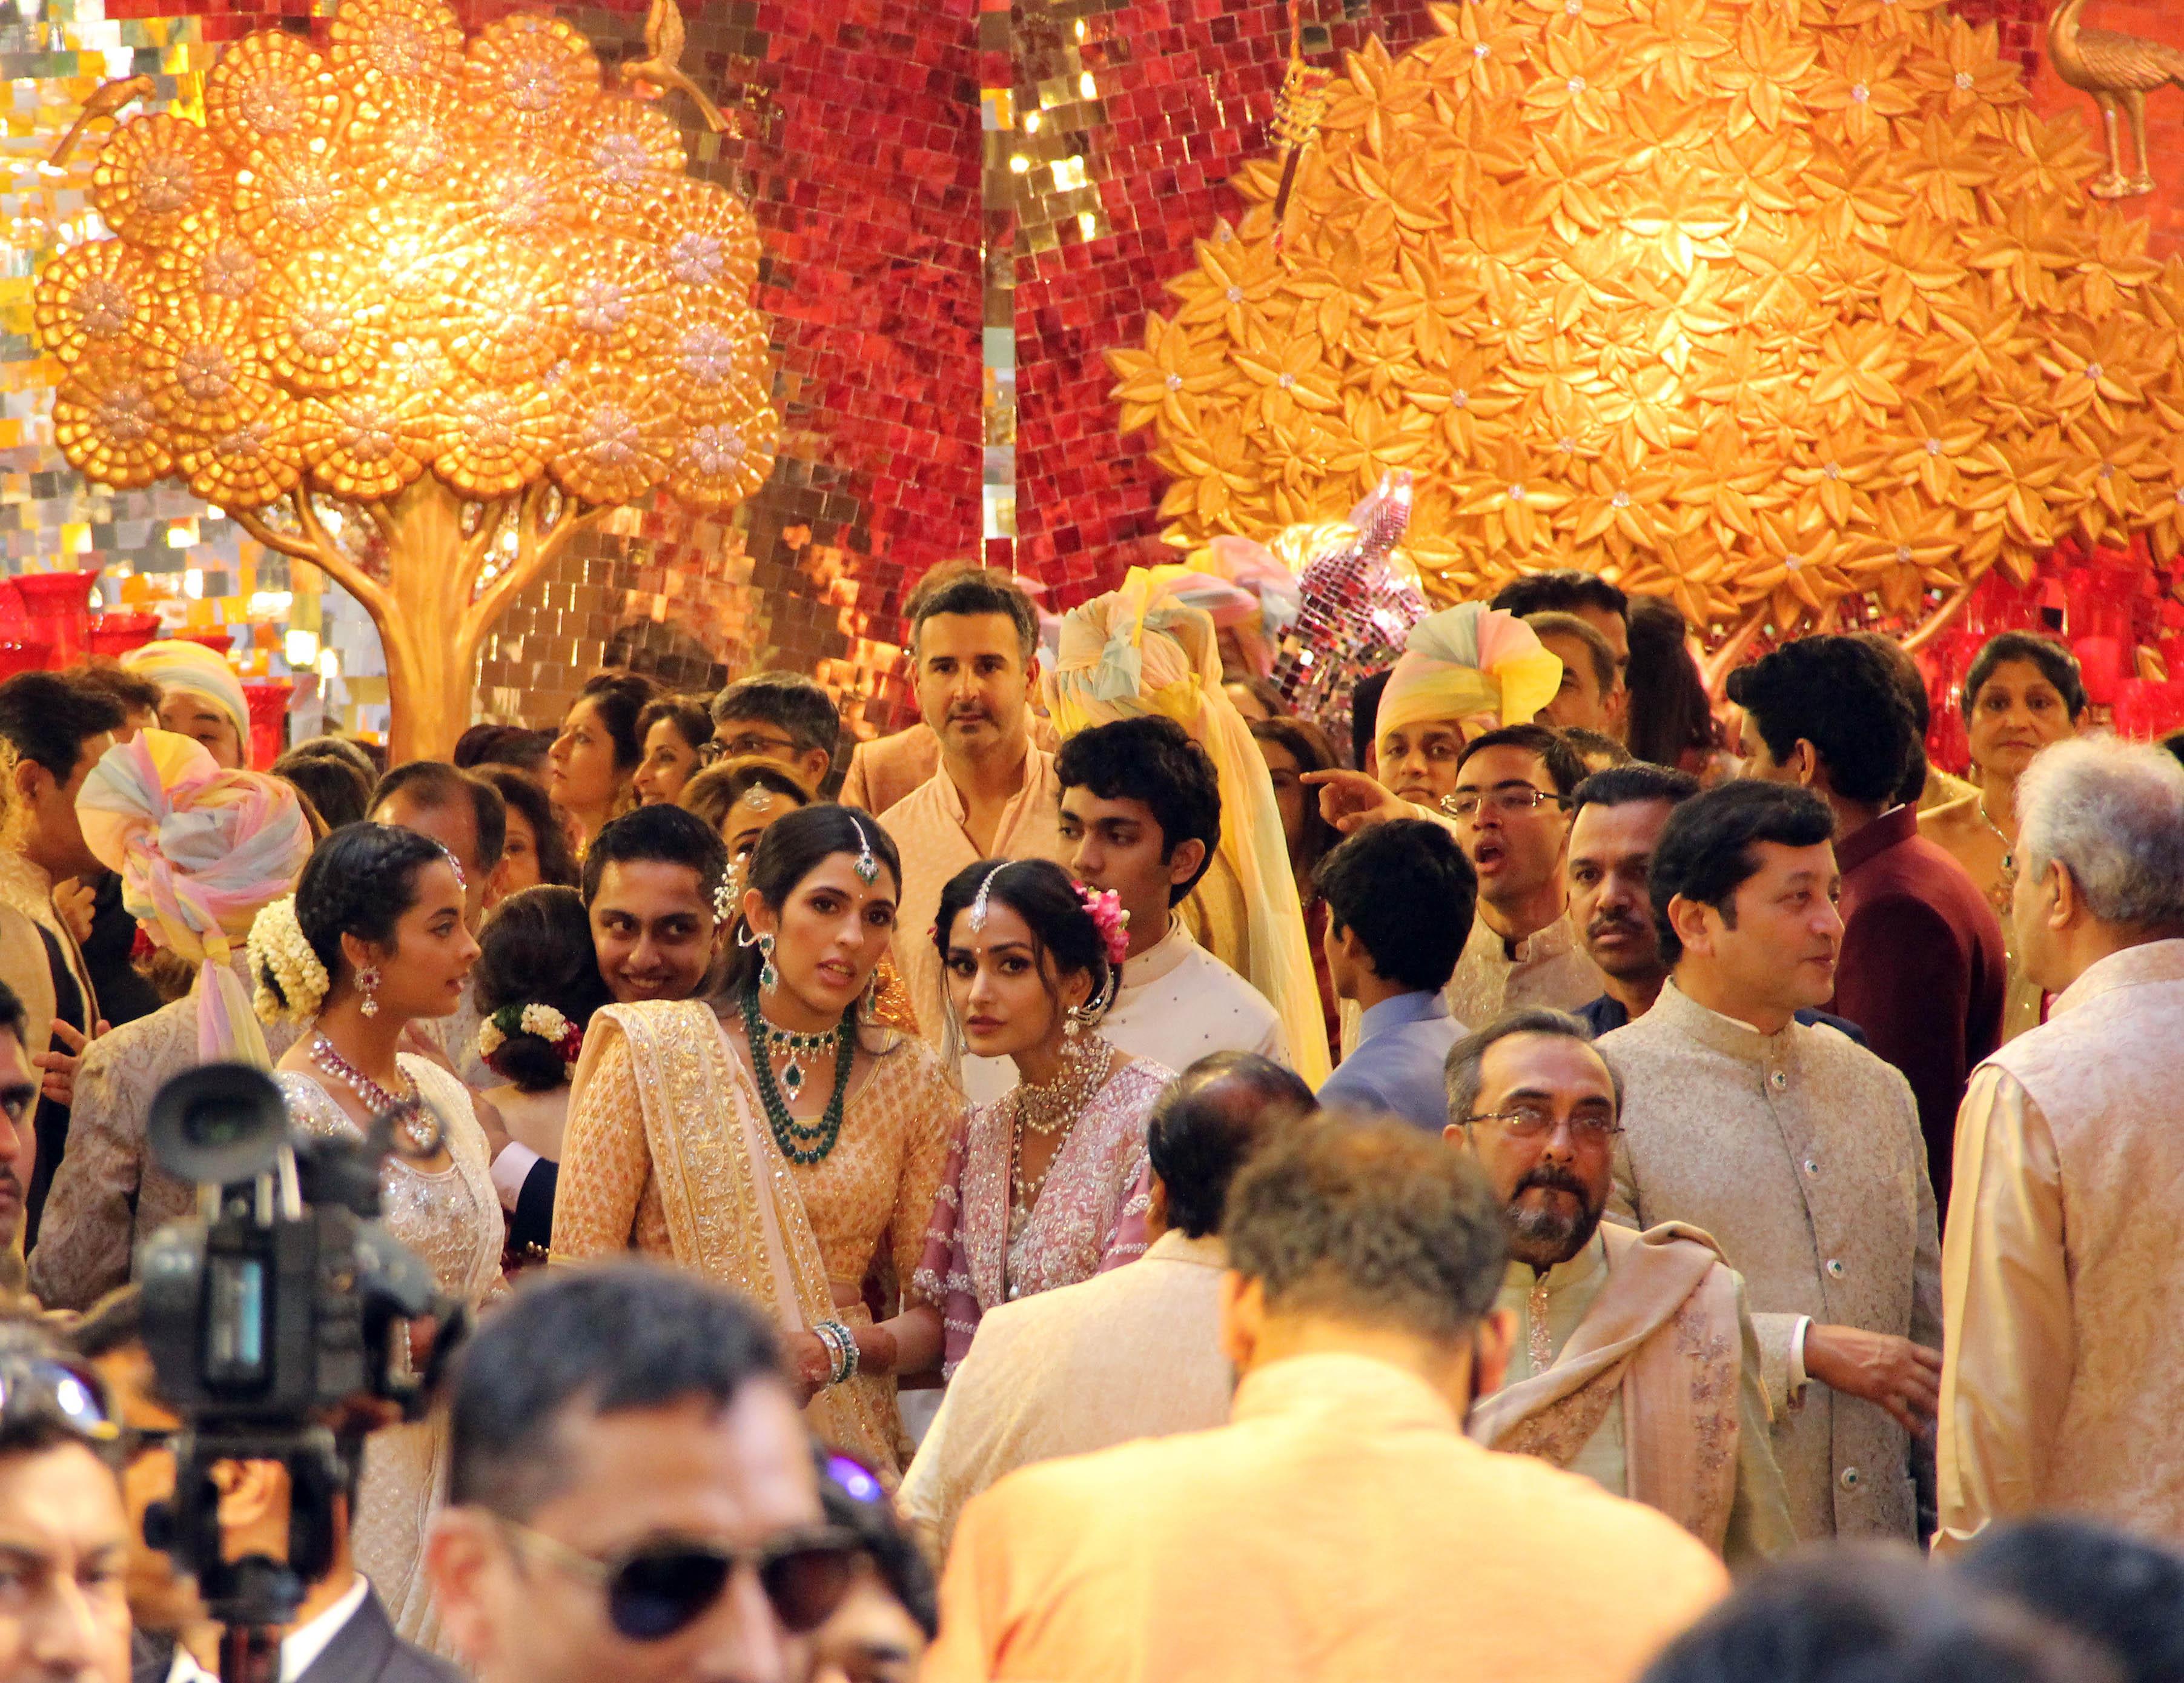 The second reception, the grandest of all was hosted by Mukesh and Nita Ambani for their daughter Isha and son-in-law Anand Piramal at Jio Gardens in BKC. The wedding reception was attended by eminent personalities from politics, Bollywood, Mumbai celebrities and many more.